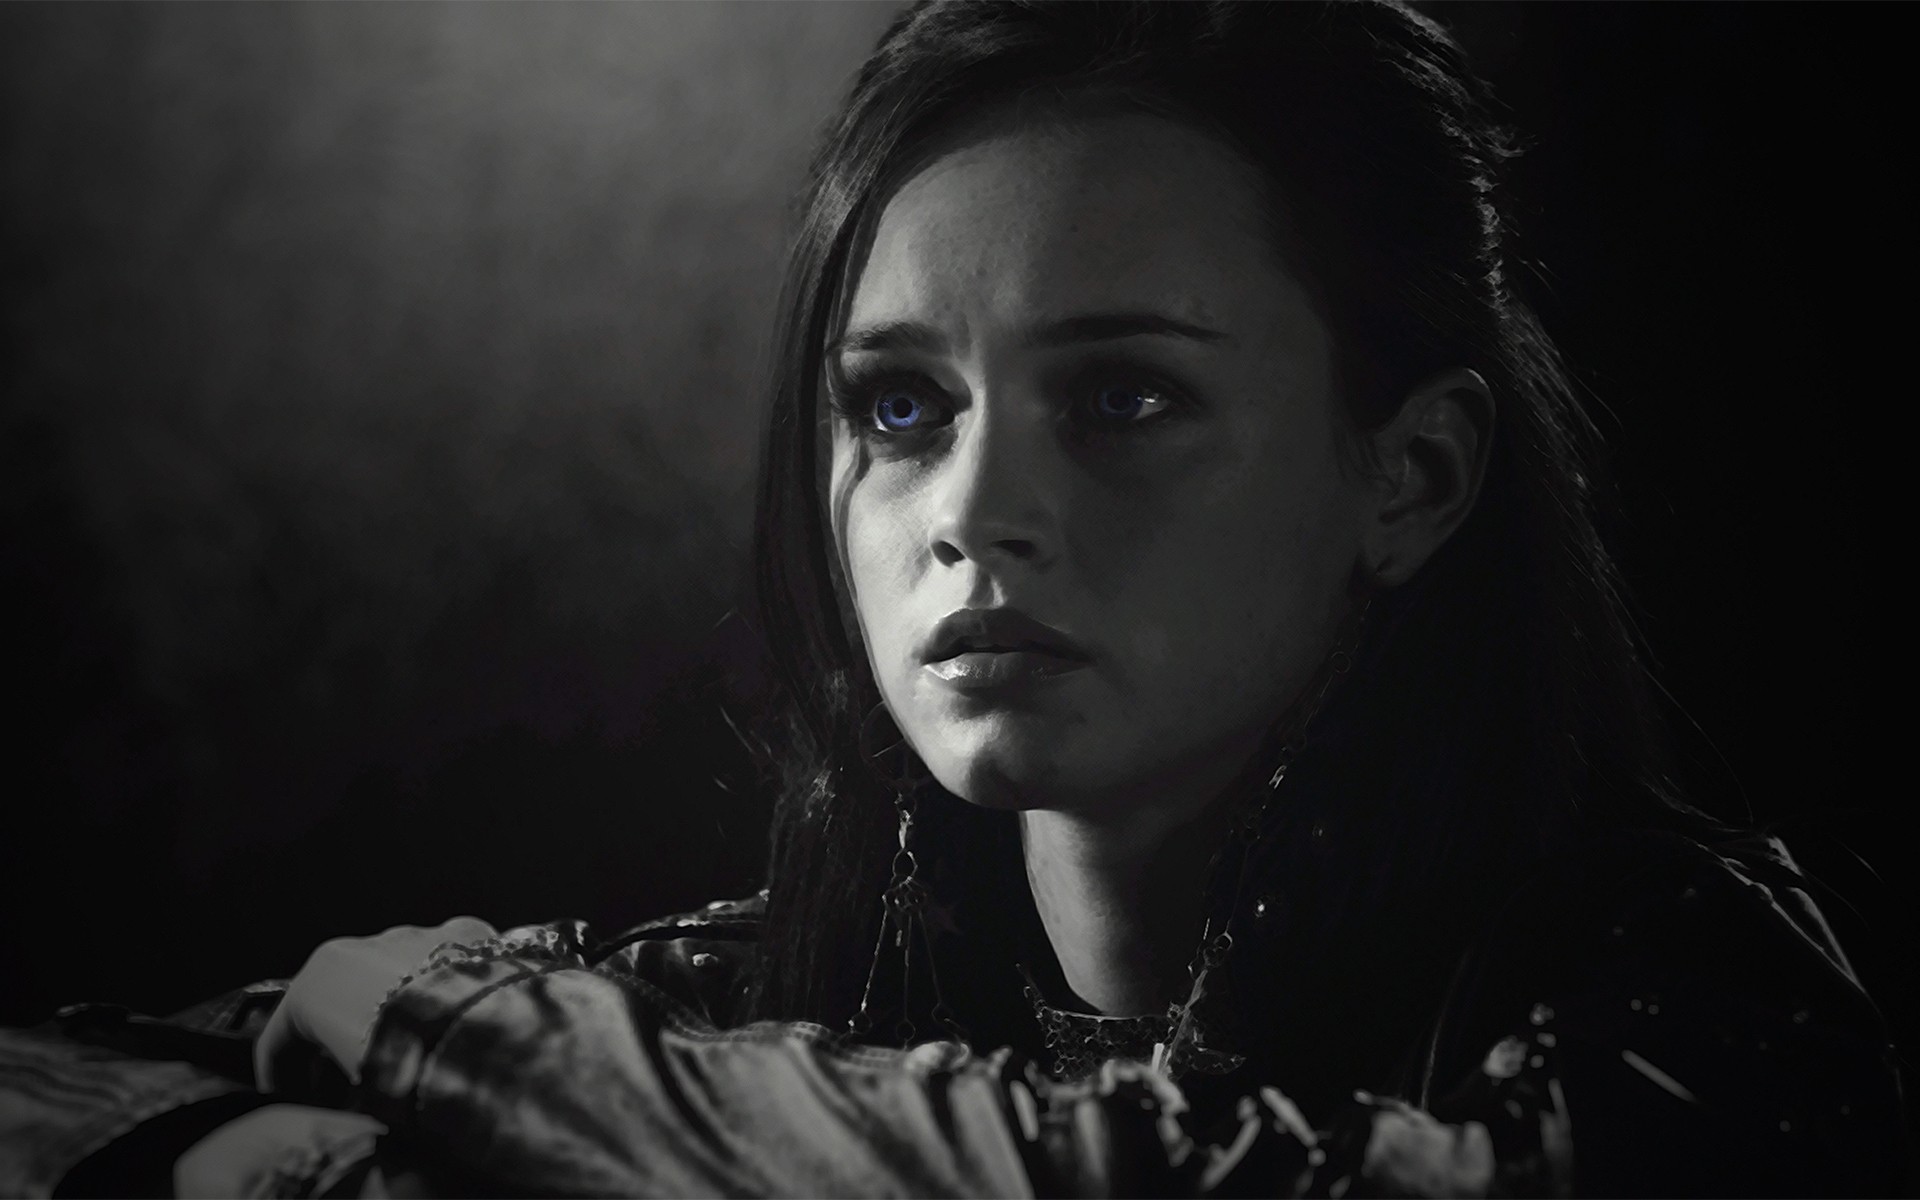 People 1920x1200 Alexis Bledel Sin City monochrome blue eyes movies women selective coloring actress film stills